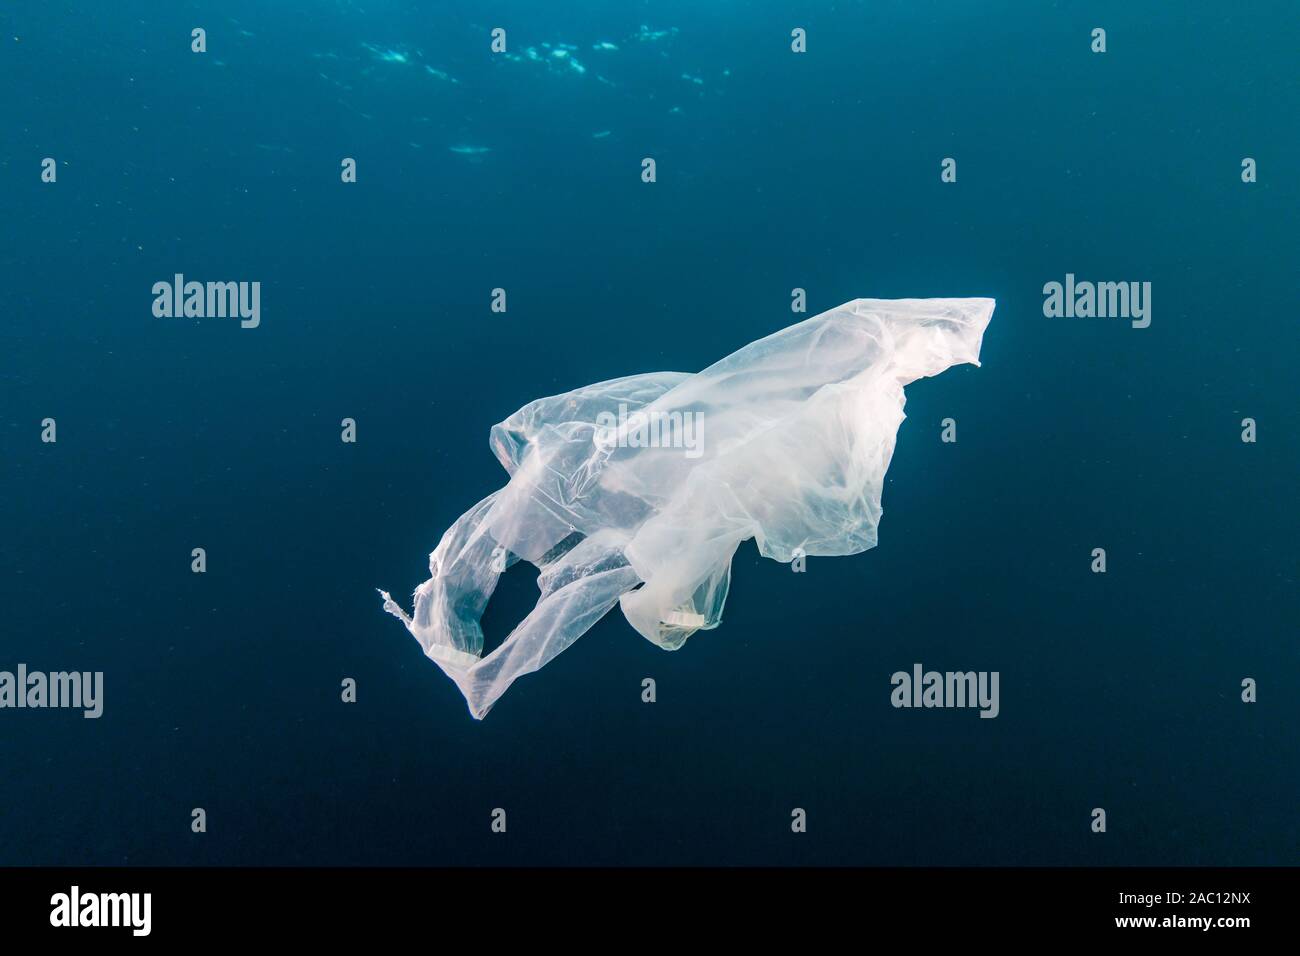 Plastic Pollution in the Ocean - A discarded plastic bag drifting underwater in a tropical ocean Stock Photo